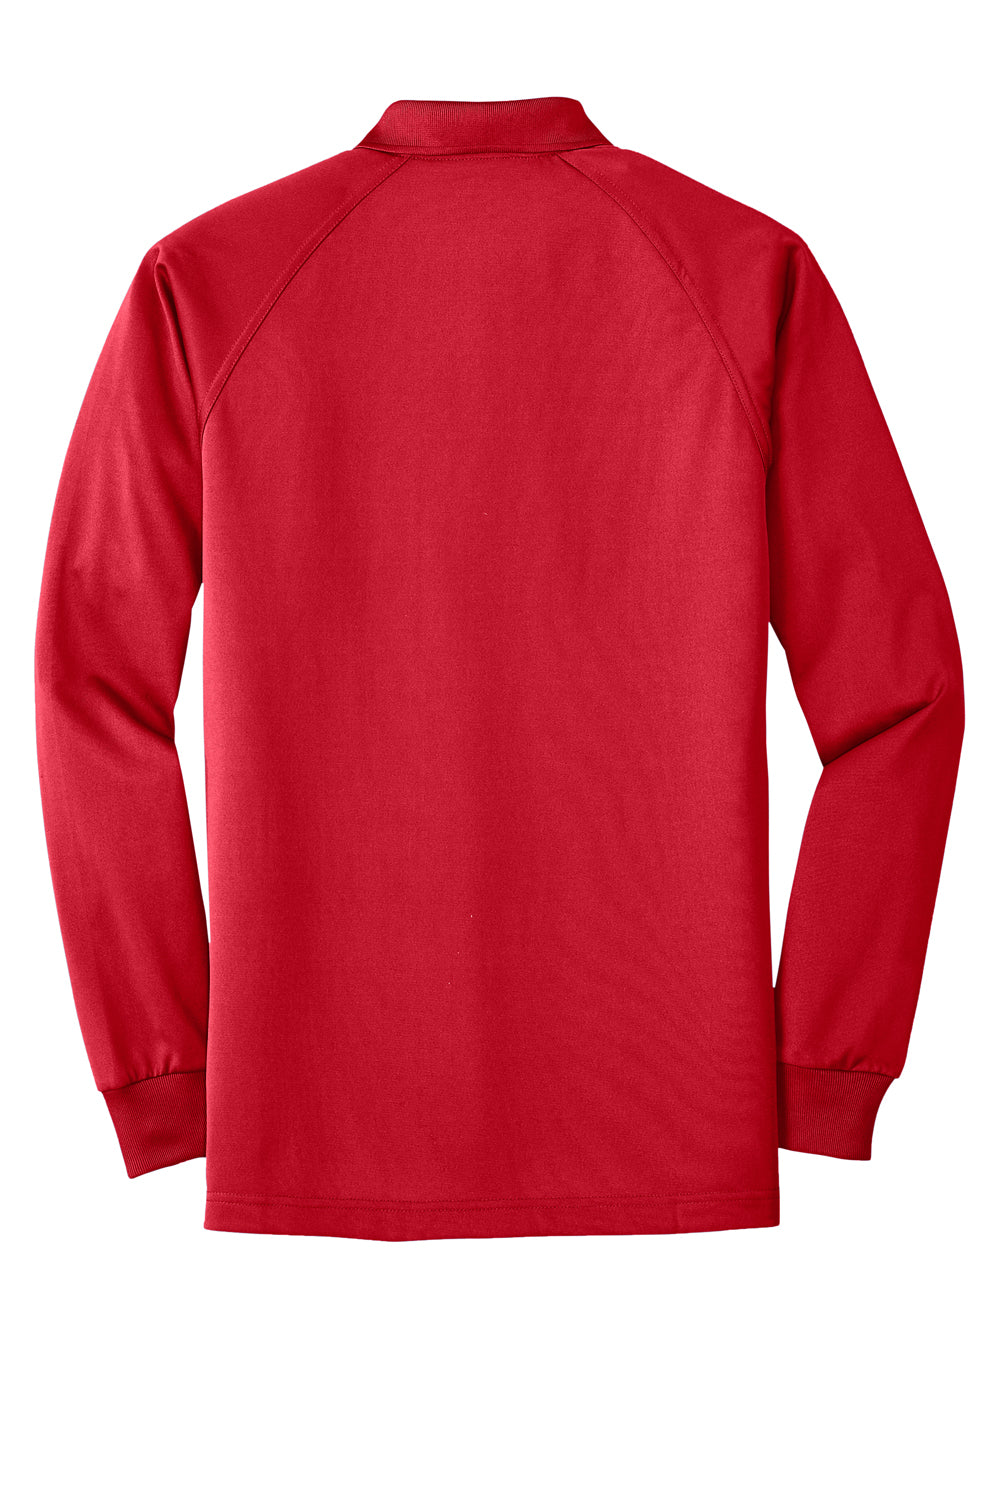 CornerStone Mens Select Tactical Moisture Wicking Long Sleeve Polo Shirt Red Flat Back